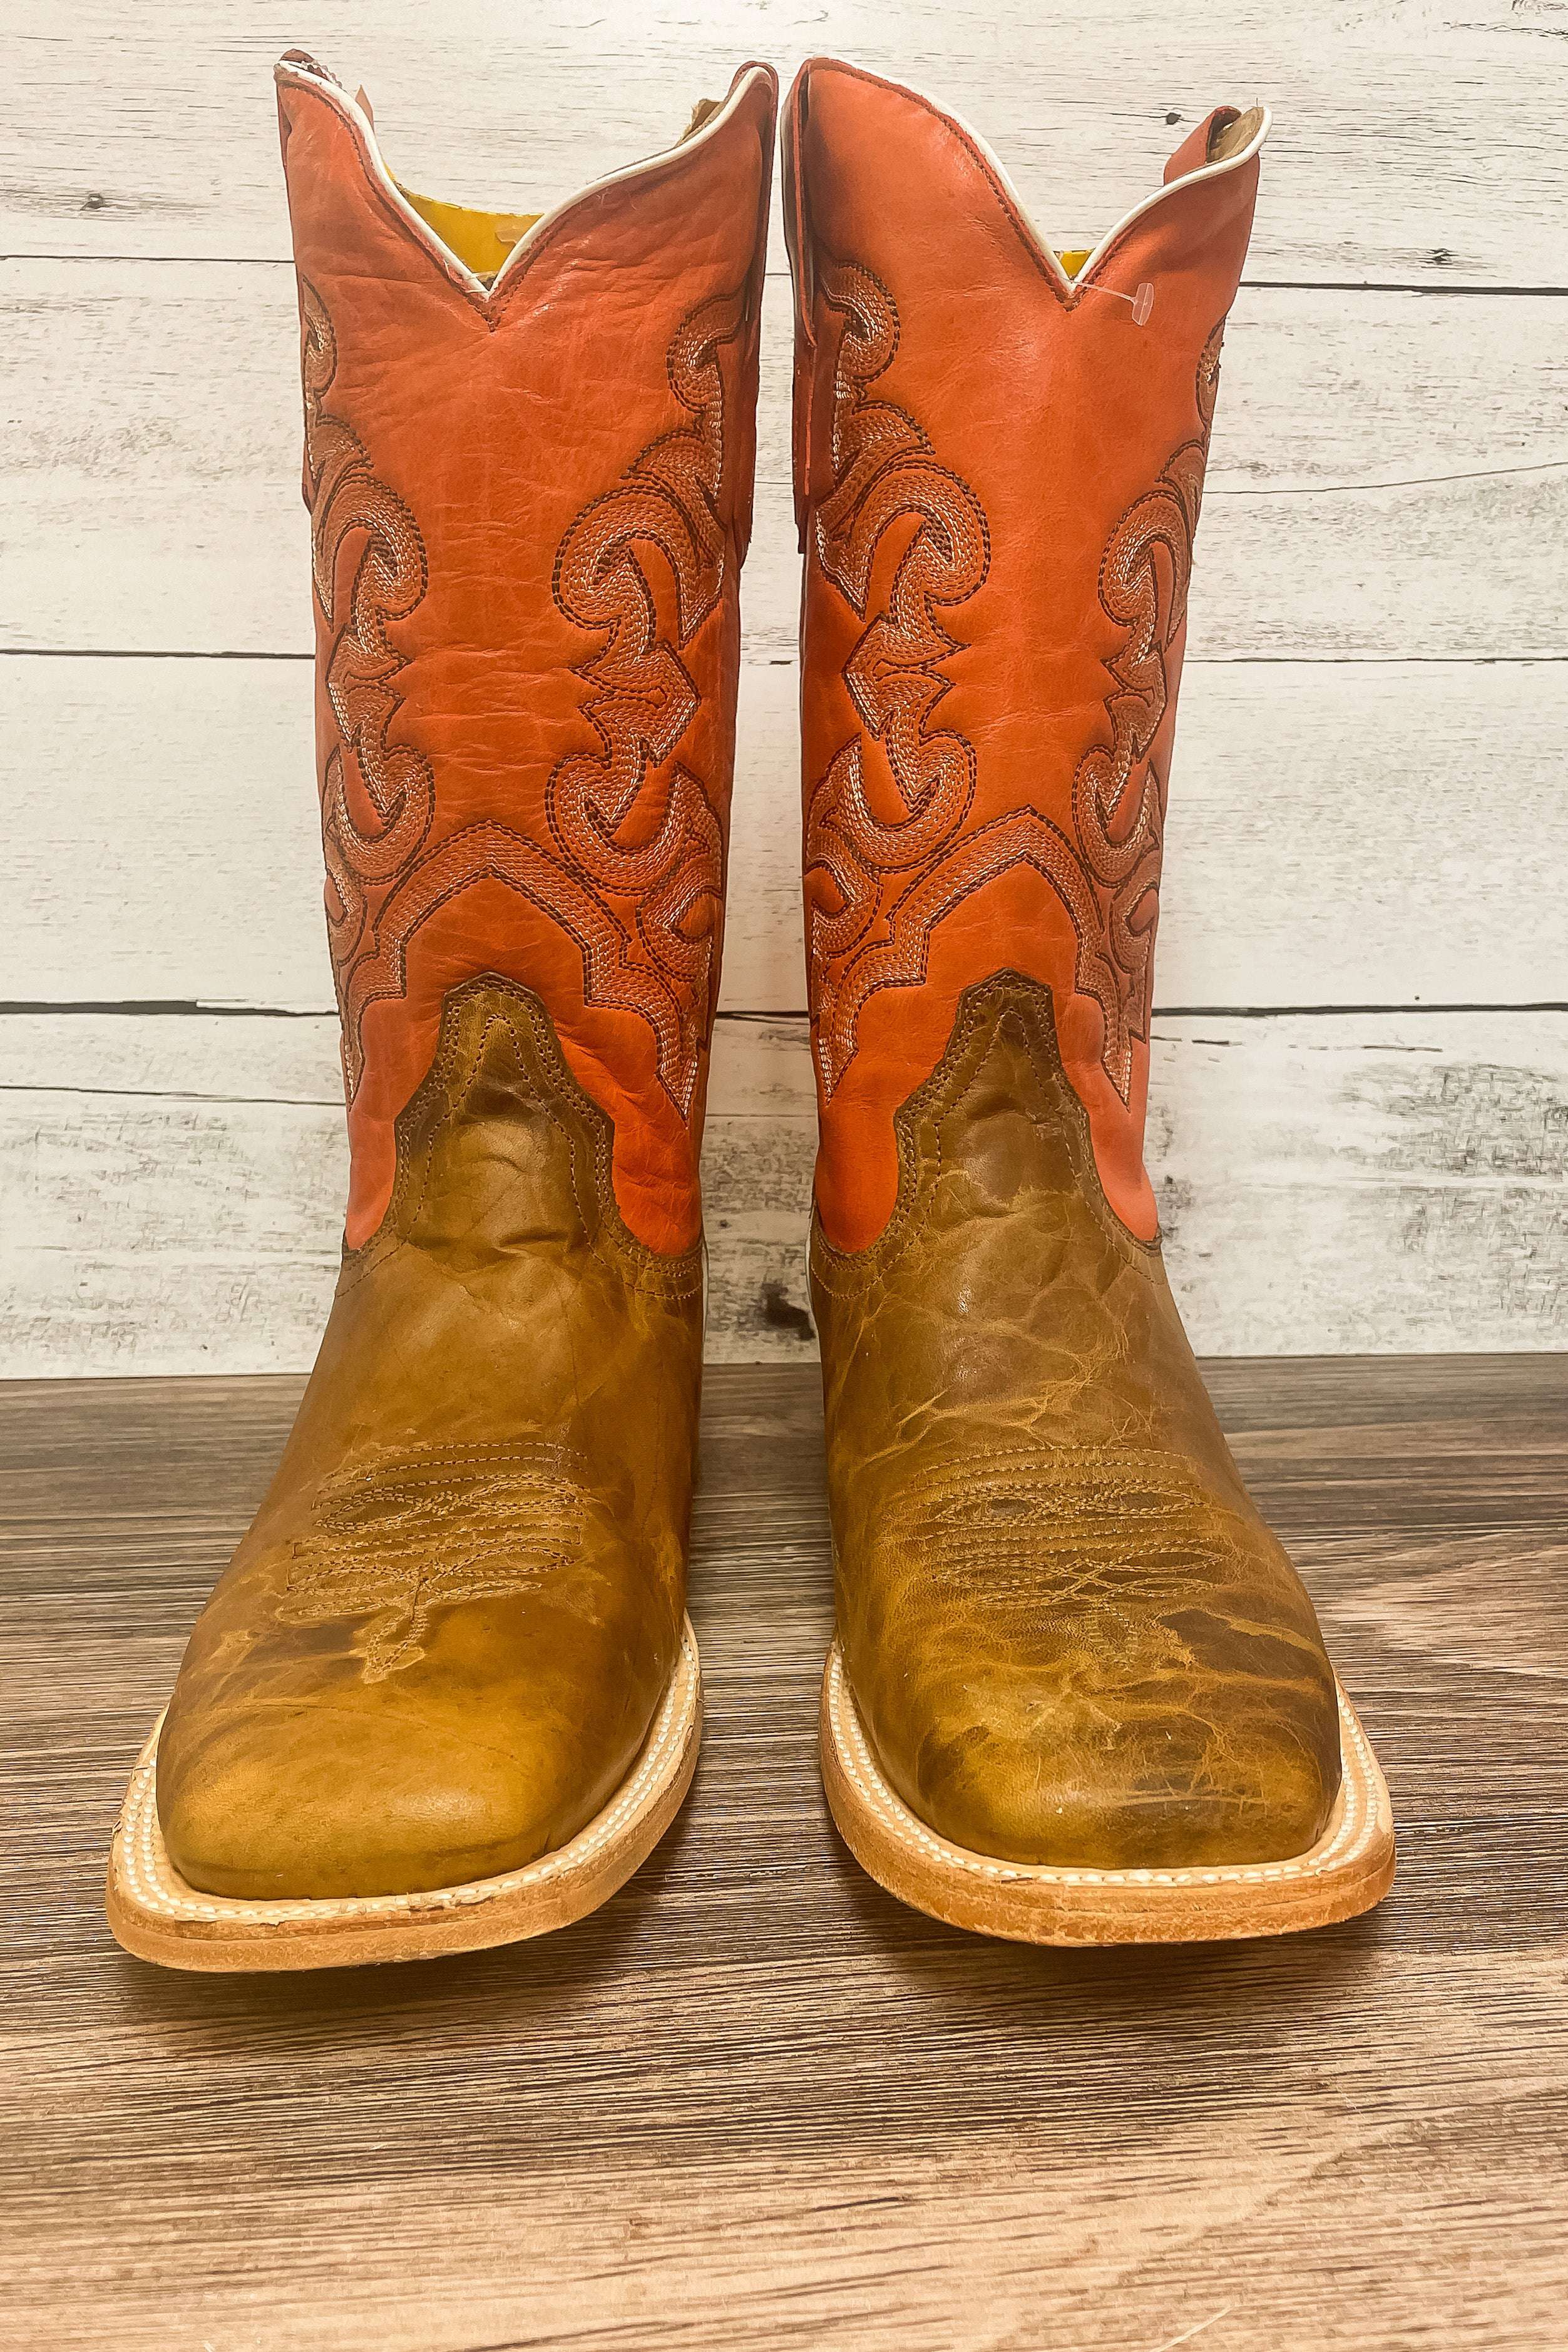 Top Notch Cowboy Boots by Corral